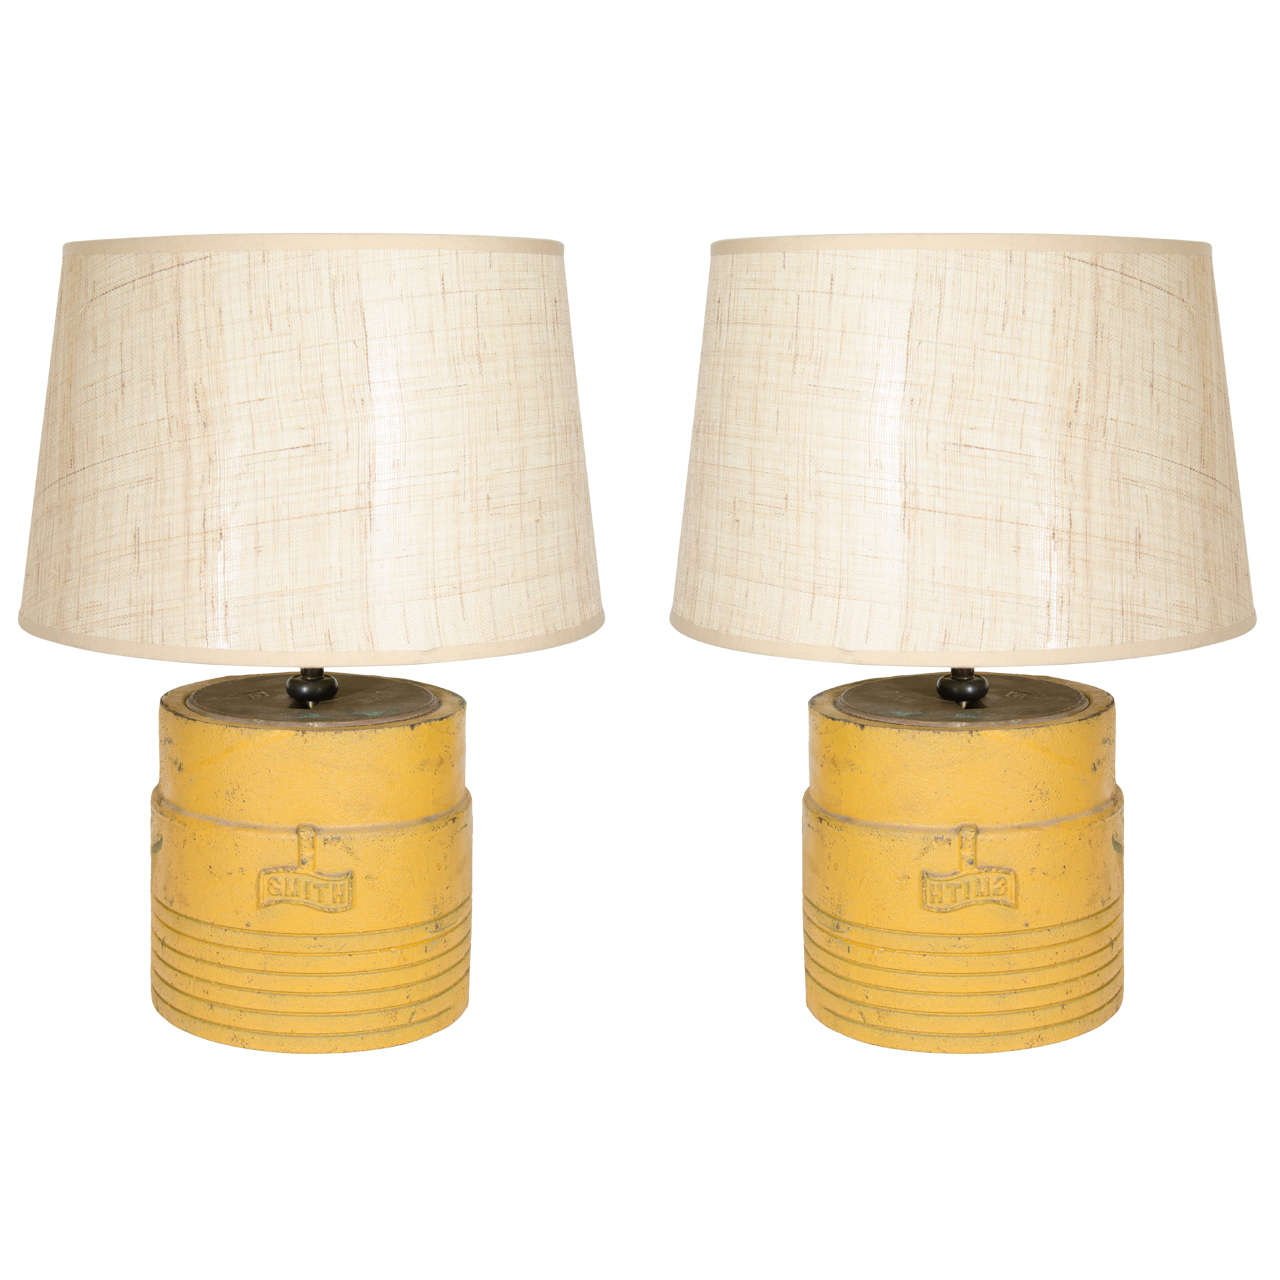 Industrial Pair of Cast Iron Table Lamps Made from Oil Well Drilling Sleeves